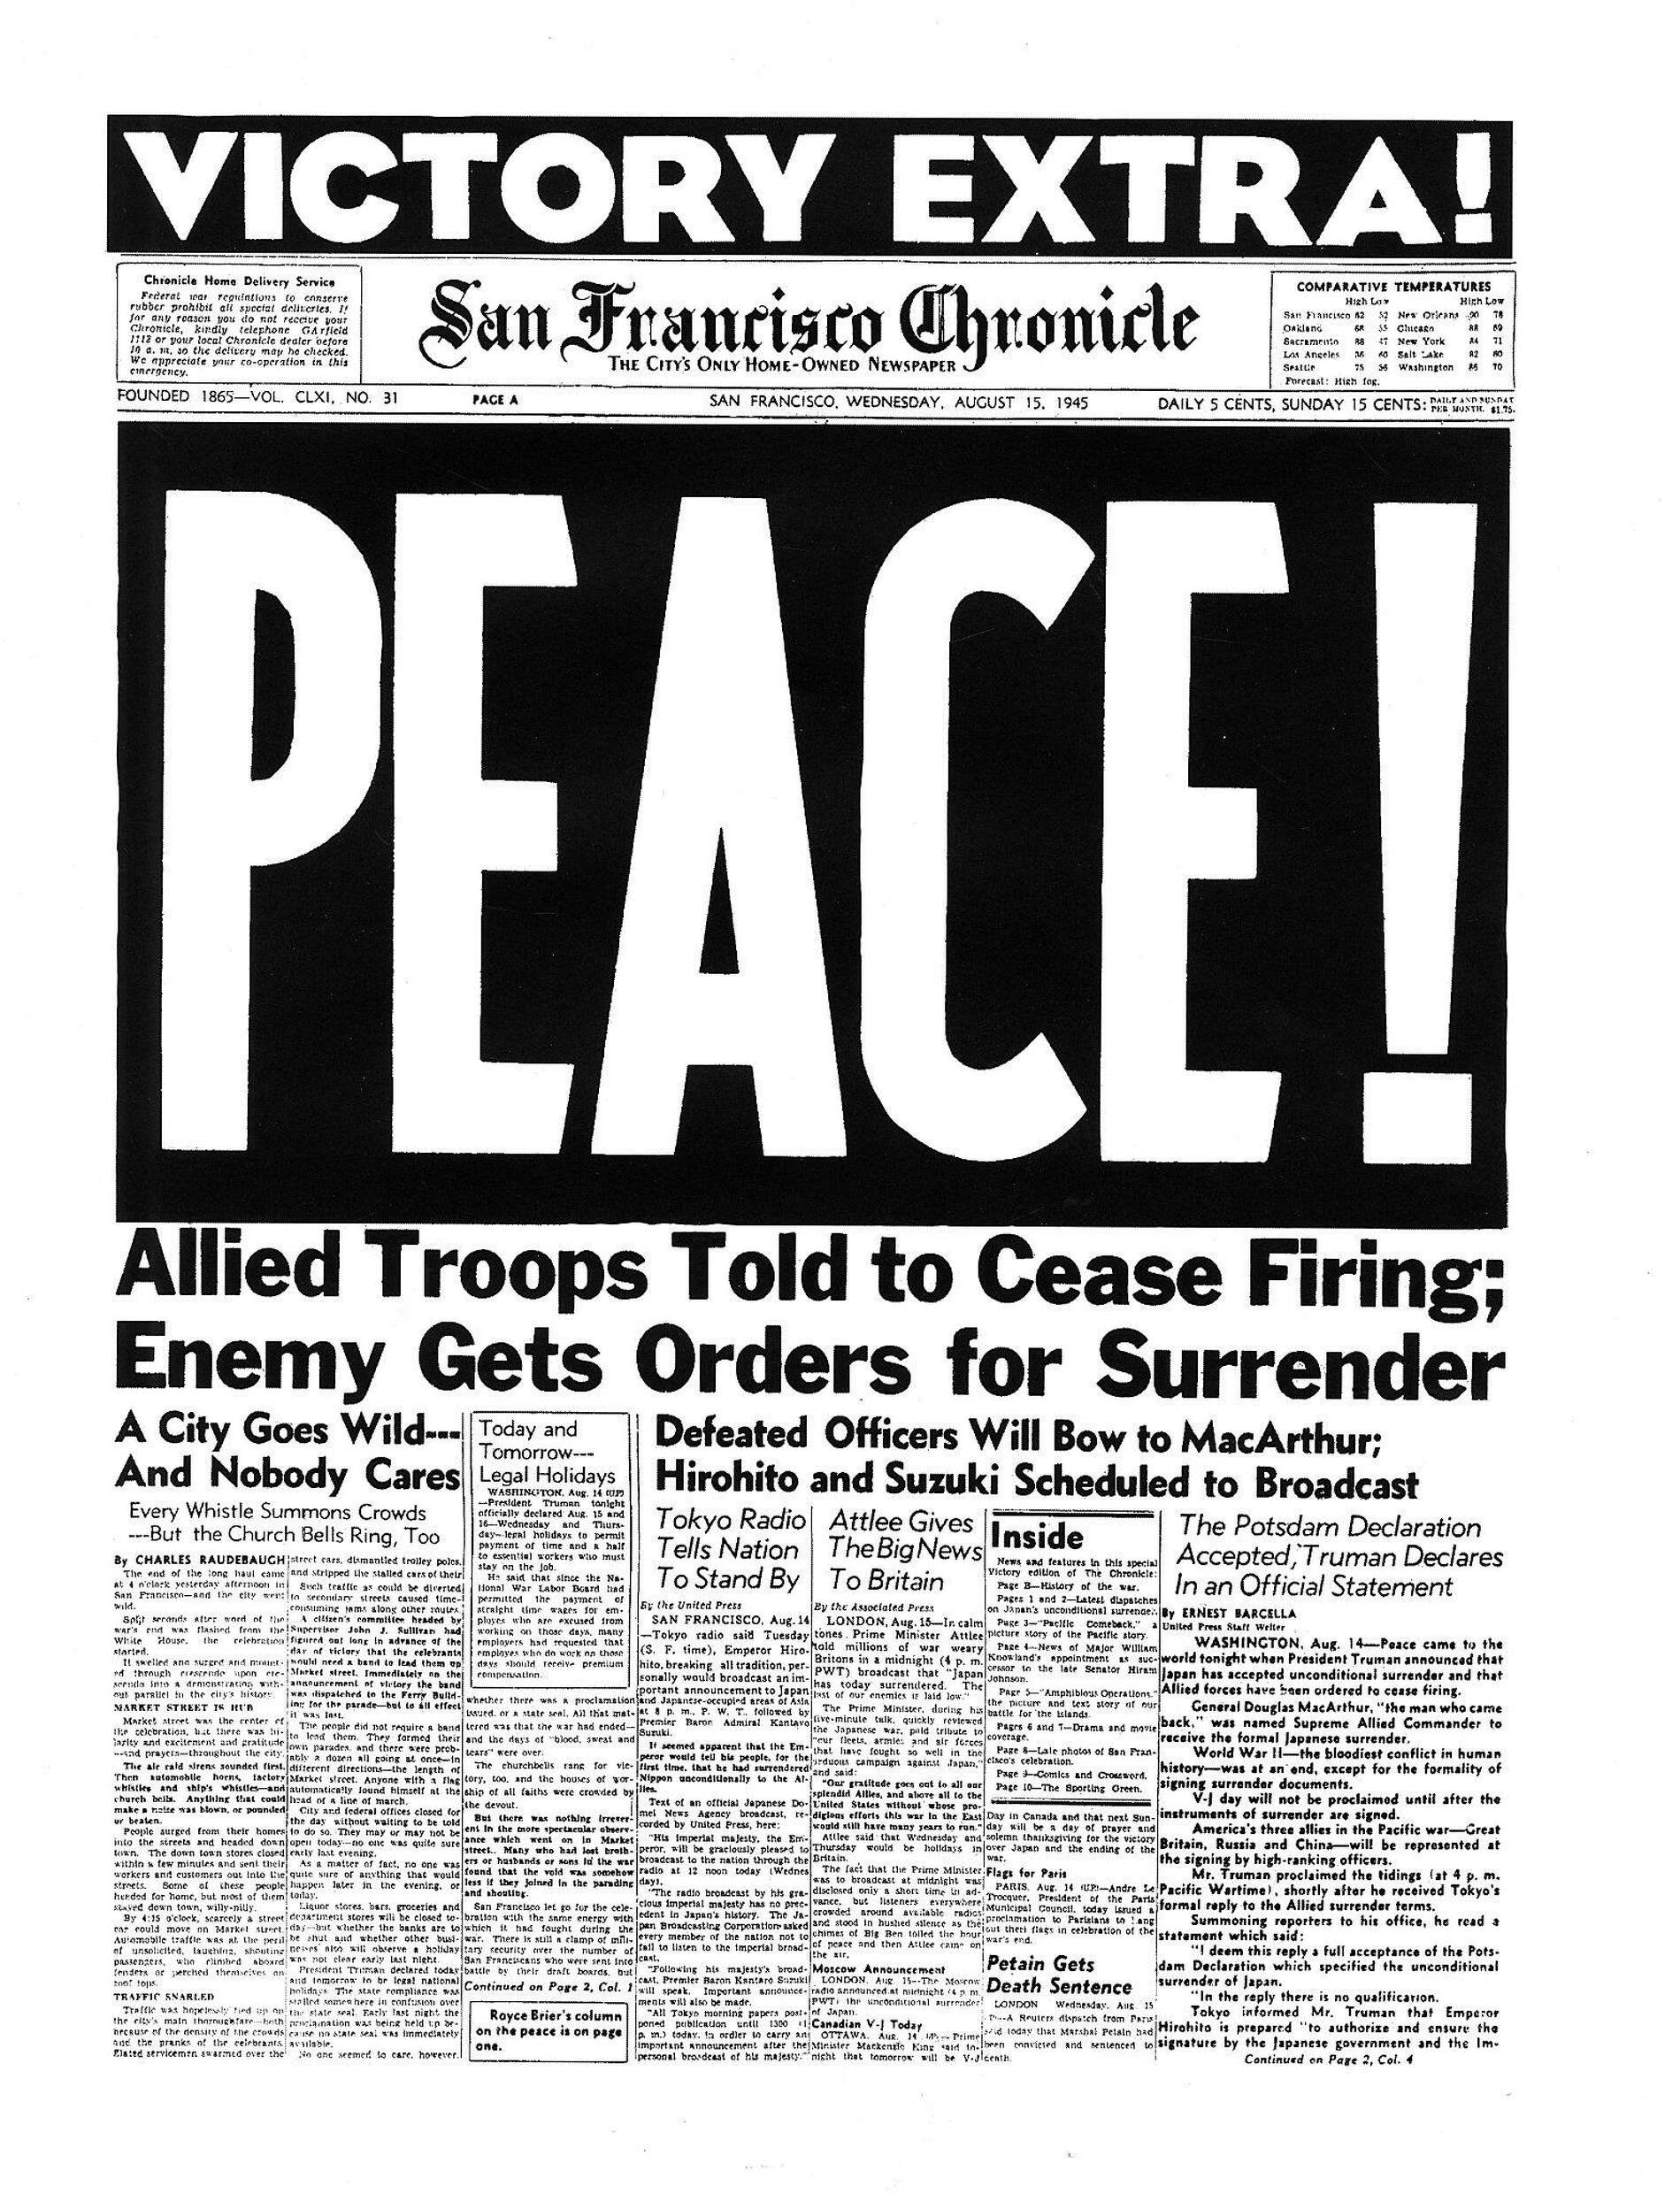 Chronicle Covers: ‘Peace!’ The greatest Chronicle headline ever